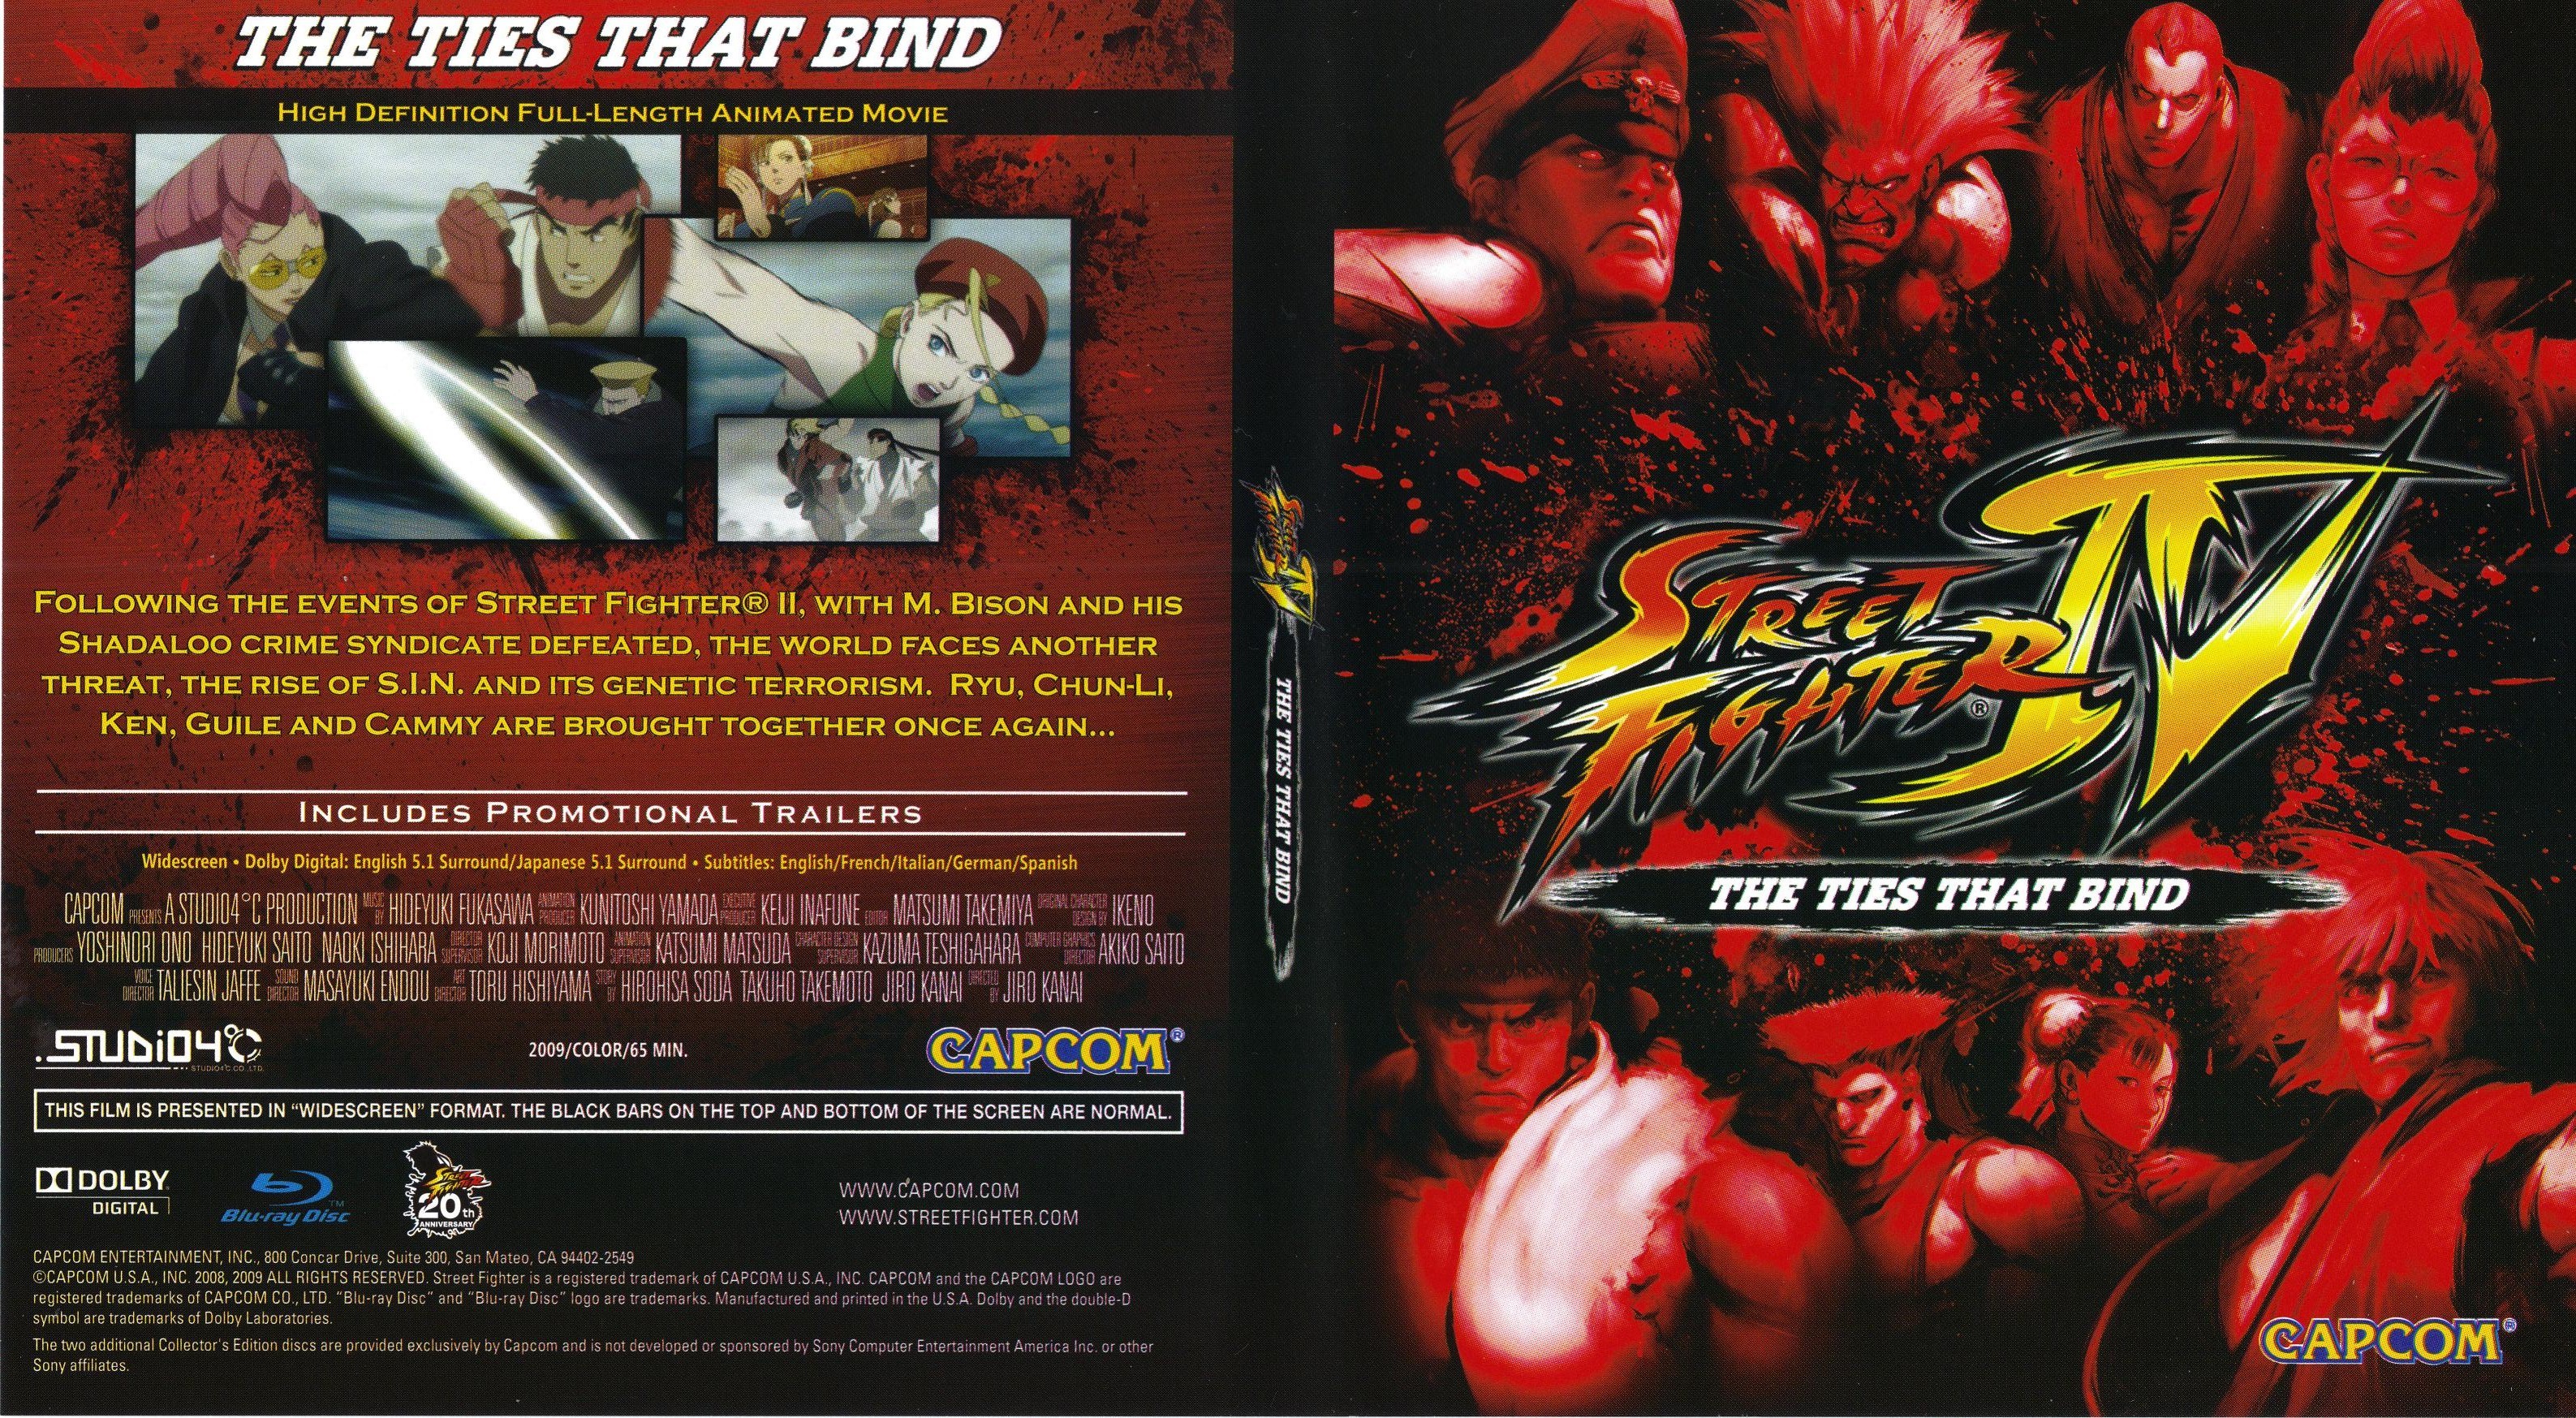 Jaquette DVD Street Fighter 4 The Ties That Bind Zone 1 (BLU-RAY)